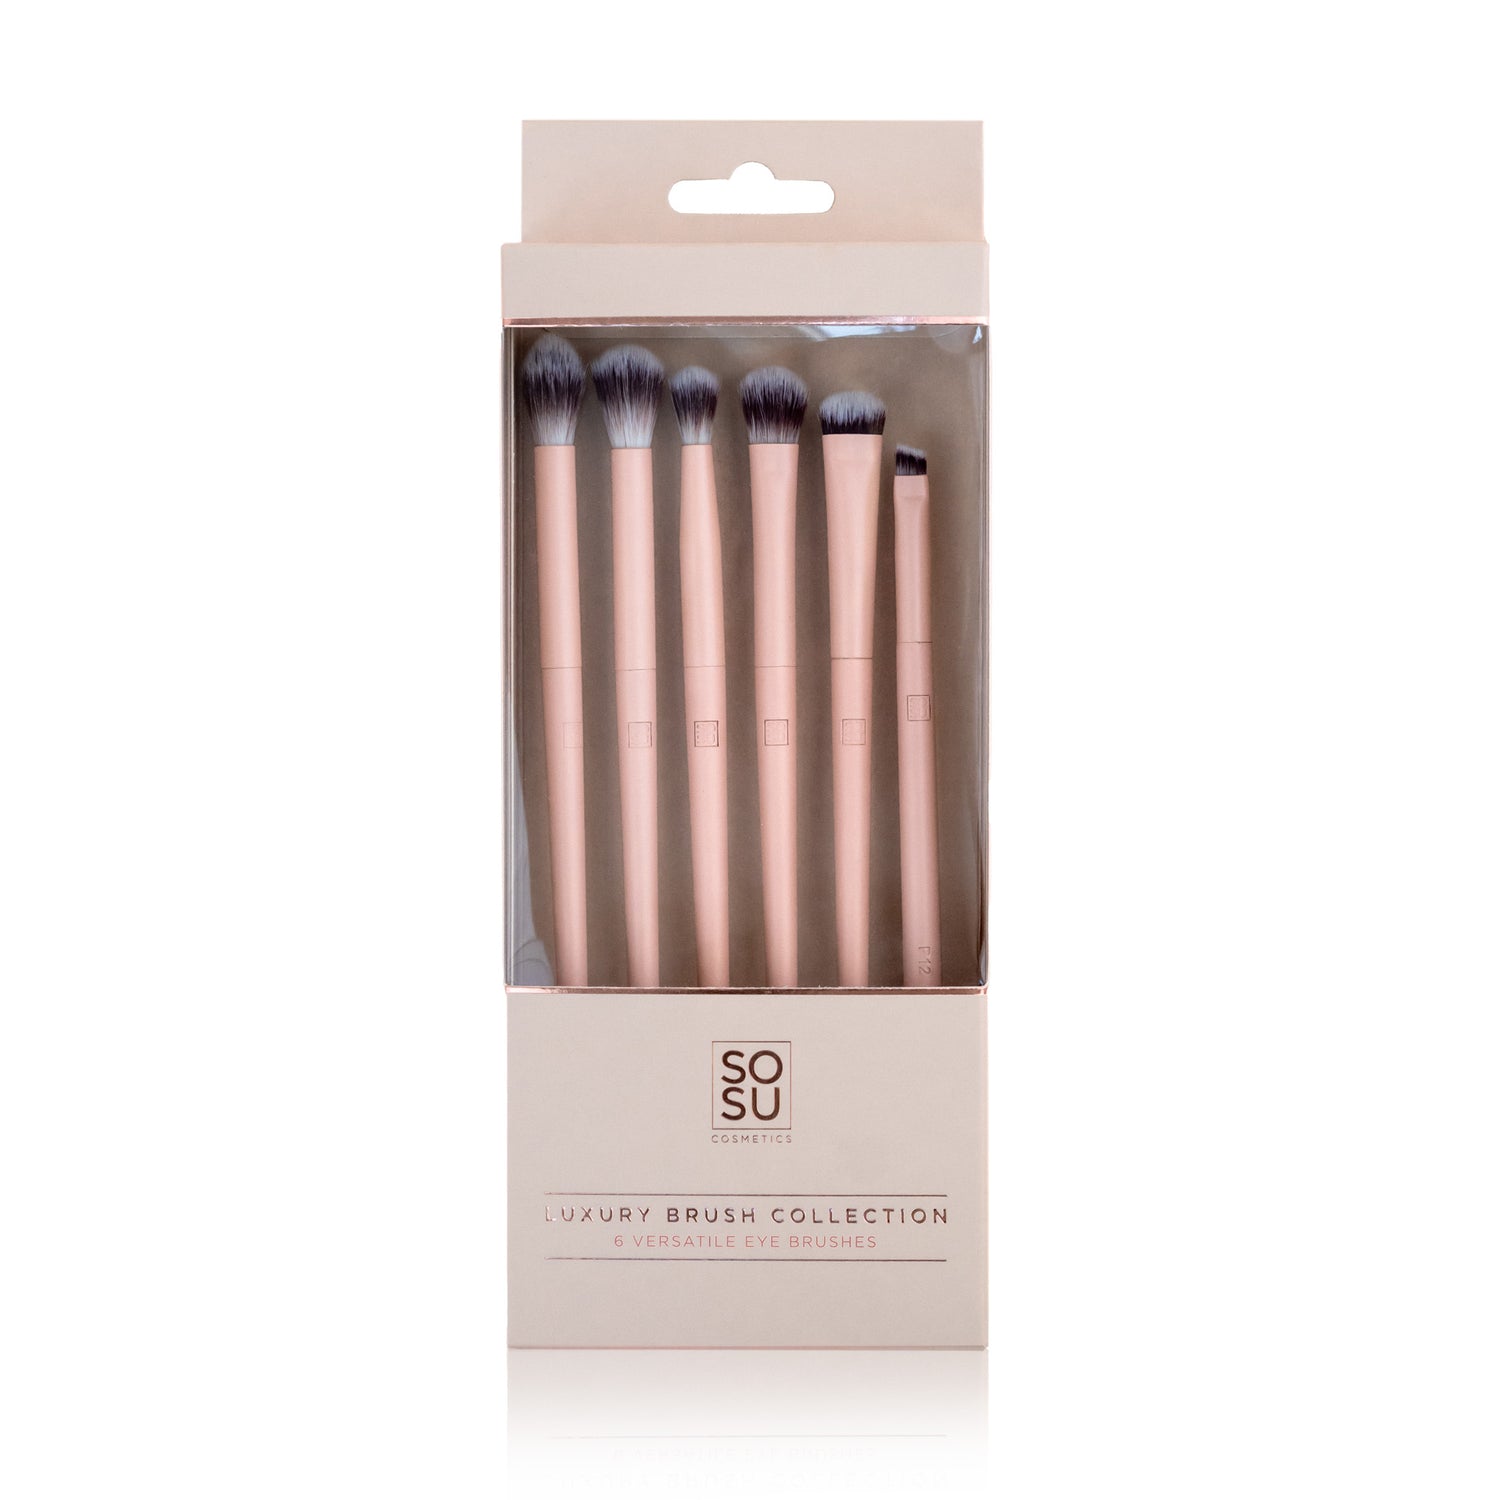 Sosu The Eye Collection Luxury Brush Collection - Nude 1 Shaws Department Stores